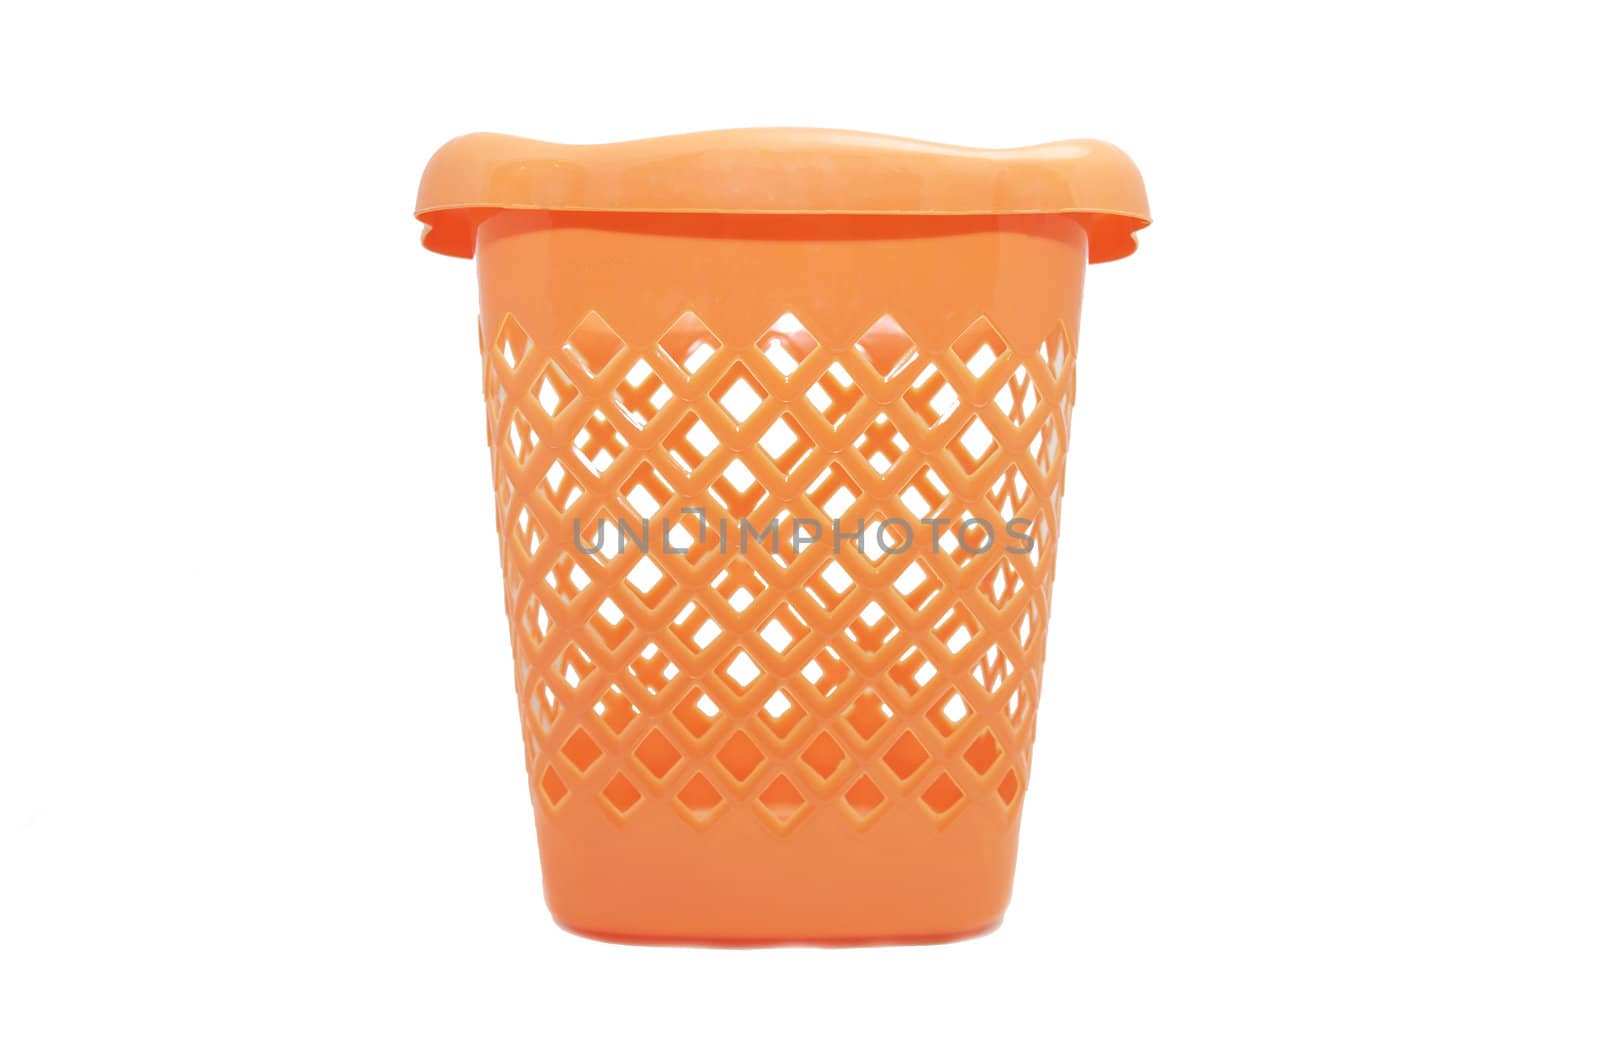 Plastic trash can by Lester120